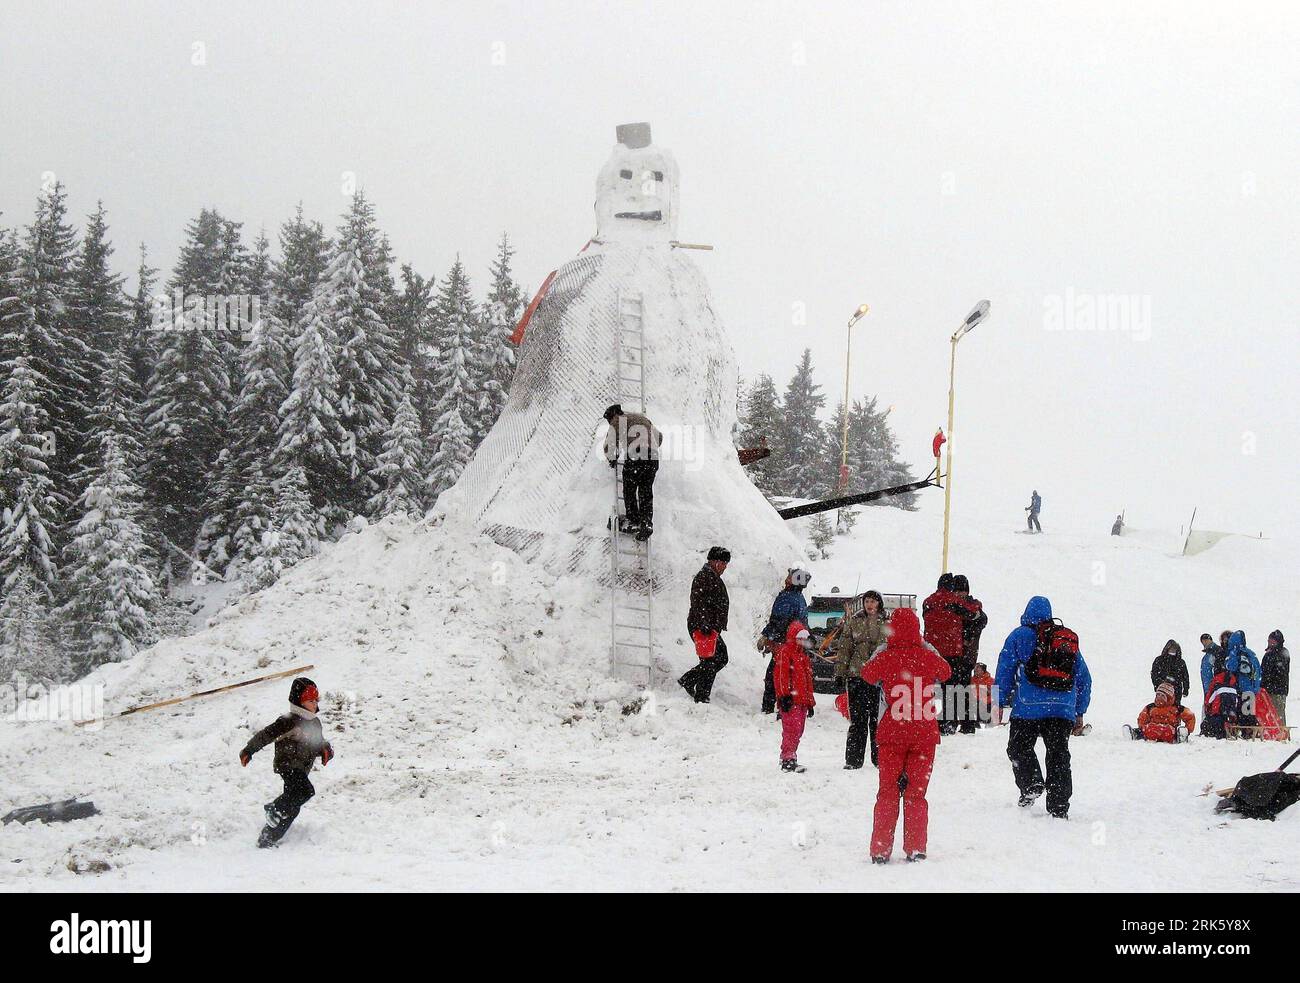 Bildnummer: 53770086  Datum: 31.01.2010  Copyright: imago/Xinhua (100201) -- JIU VALLEY, Feb. 1, 2010 (Xinhua) -- A snowman with a height of 8.1 meters is built by locals to celebrate the ongoing Snowman Festival in the resort Straja in Jiu Valley, central west Romania, Jan. 31, 2010. (Xinhua/Agerpres) (wh) (1)ROMANIA-SNOWMAN FESTIVAL-GIANT SNOWMAN PUBLICATIONxNOTxINxCHN kbdig xkg 2010 quer o0 Jahreszeit Winter Schneemann    Bildnummer 53770086 Date 31 01 2010 Copyright Imago XINHUA 100201 Jiu Valley Feb 1 2010 XINHUA a Snowman With a Height of 8 1 METERS IS built by Locals to Celebrate The on Stock Photo